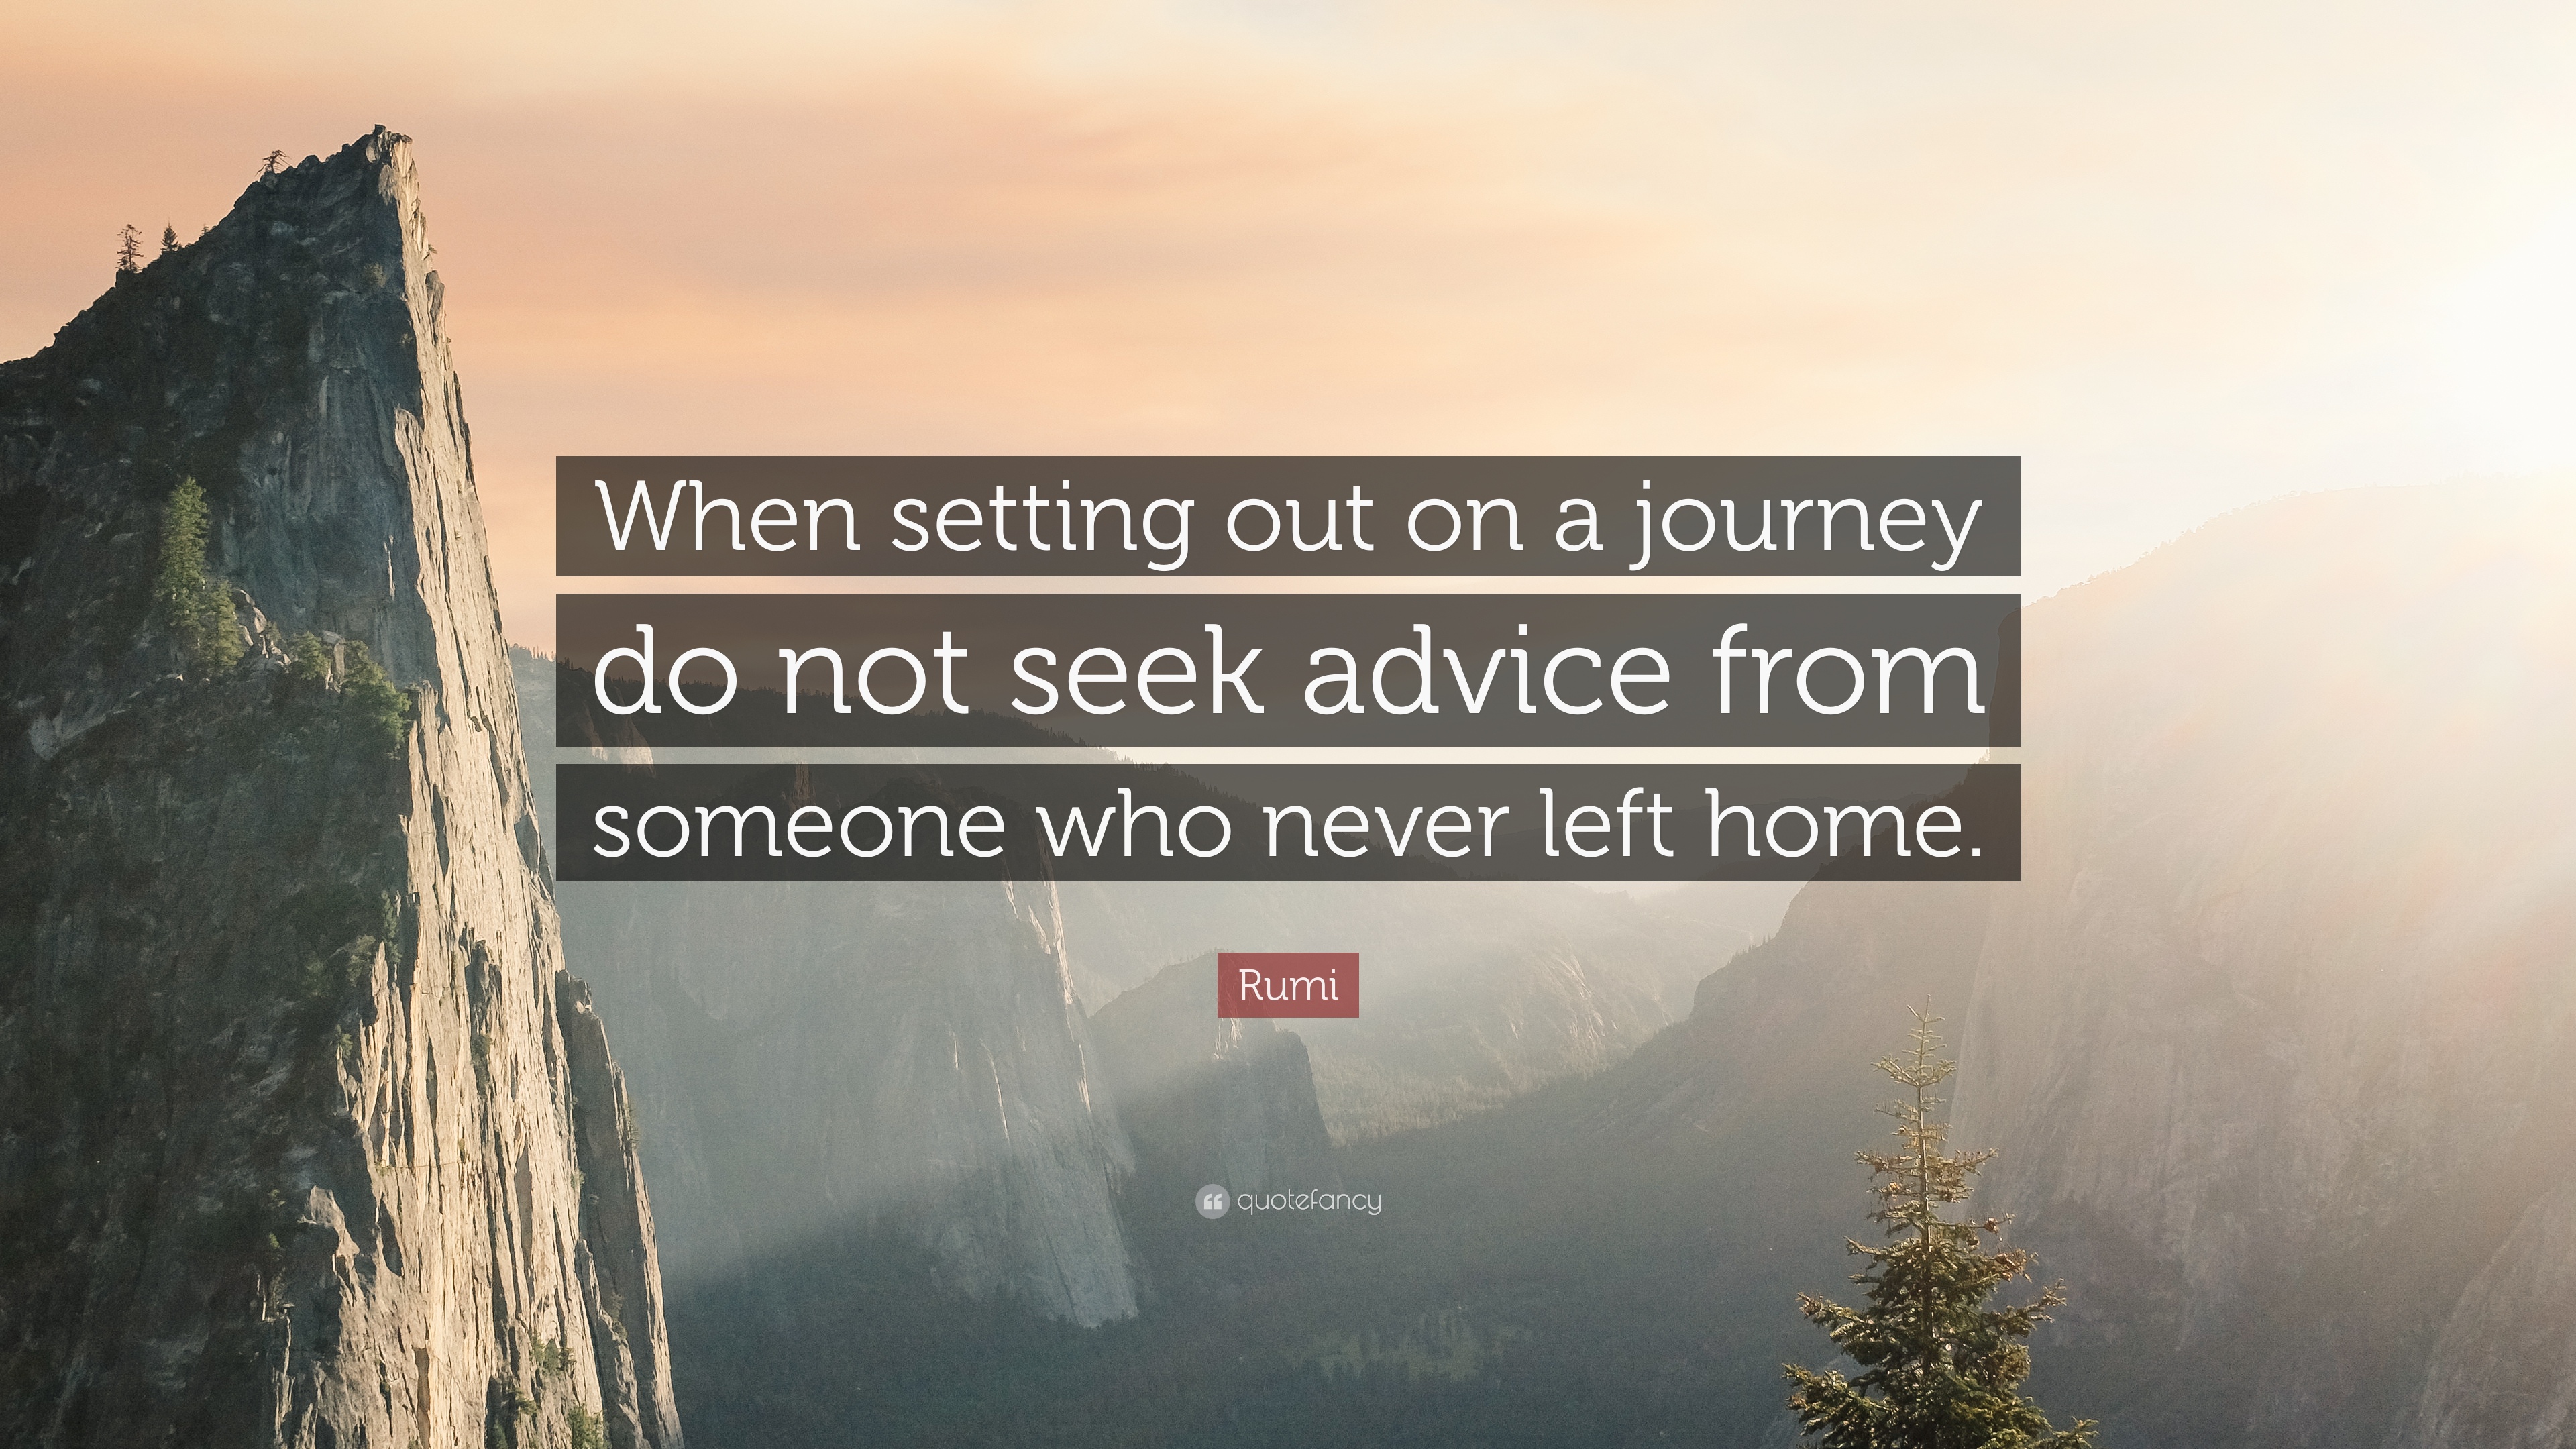 Rumi Quote: “When setting out on a journey do not seek advice from ...